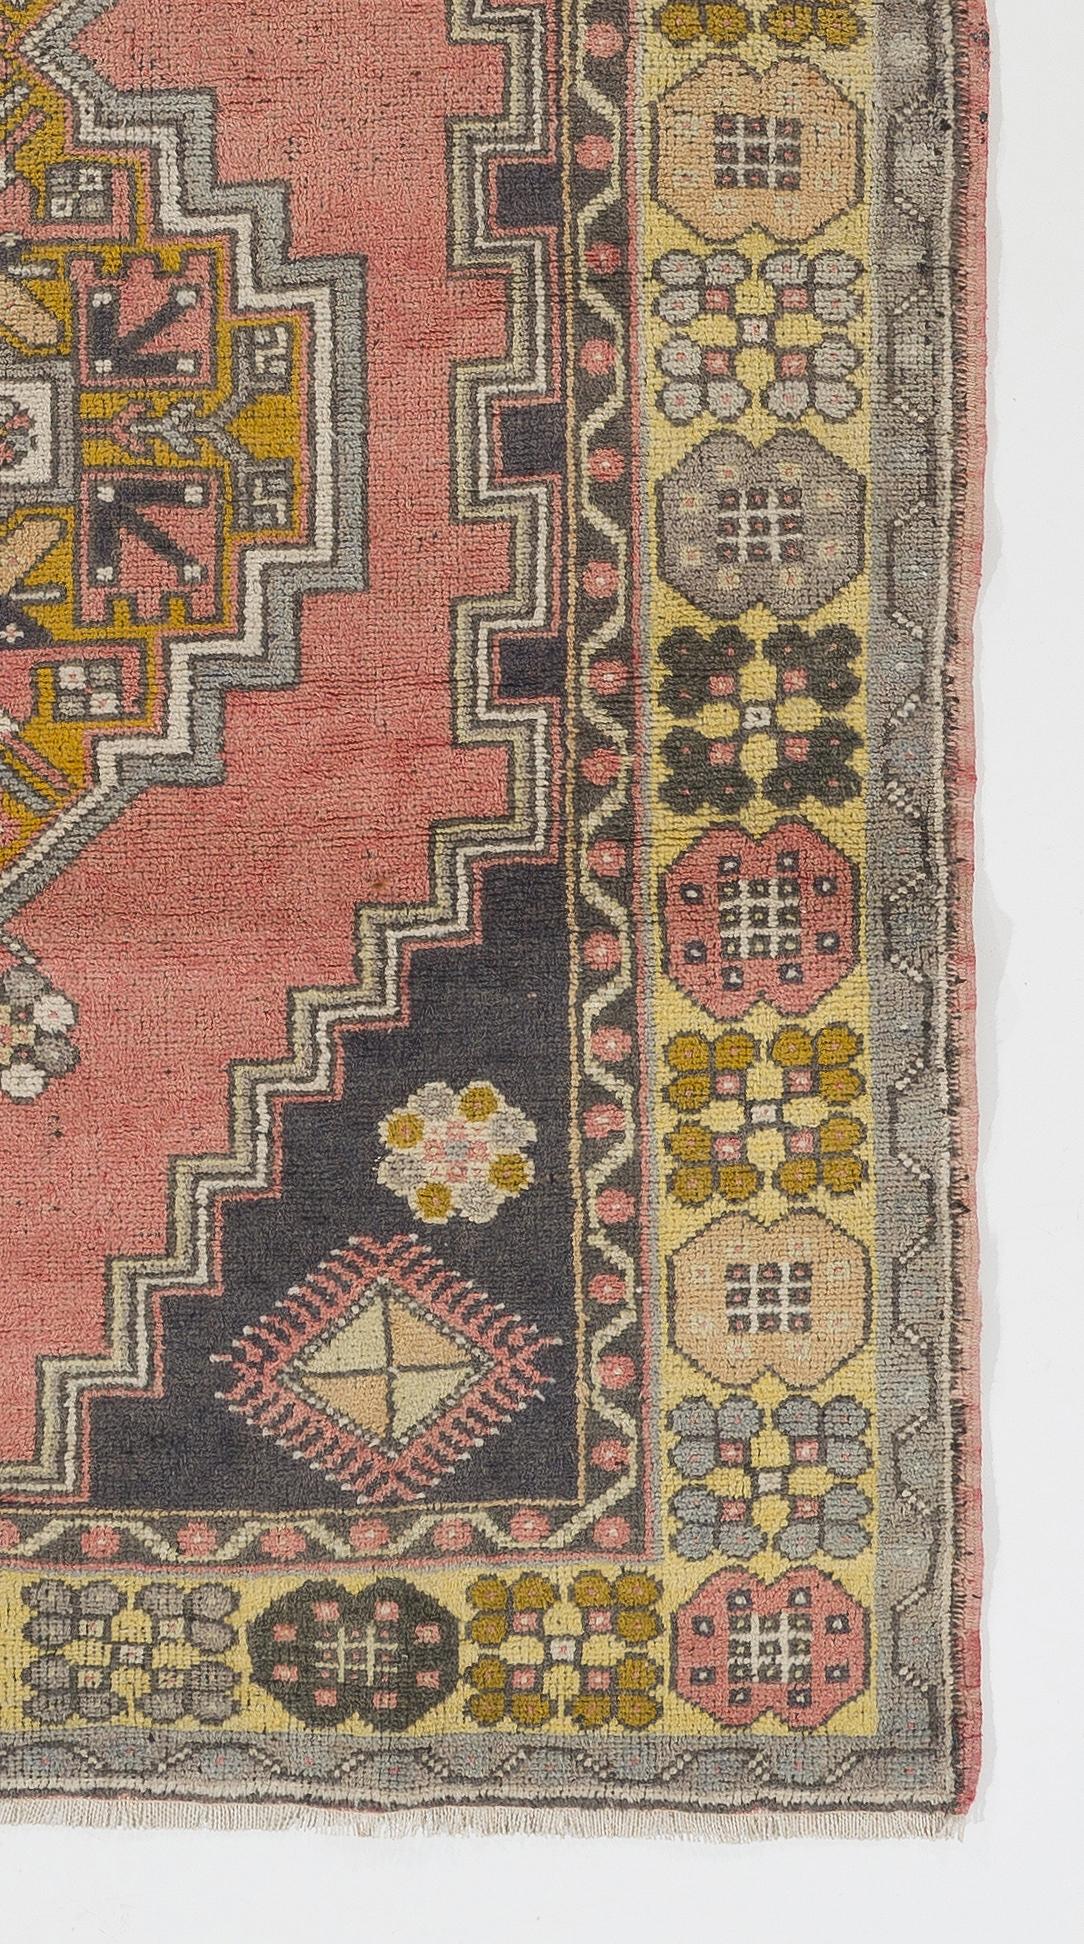 4x7 Ft Vintage Handmade Turkish Accent Rug with Geometric Design in Muted Colors In Good Condition For Sale In Philadelphia, PA